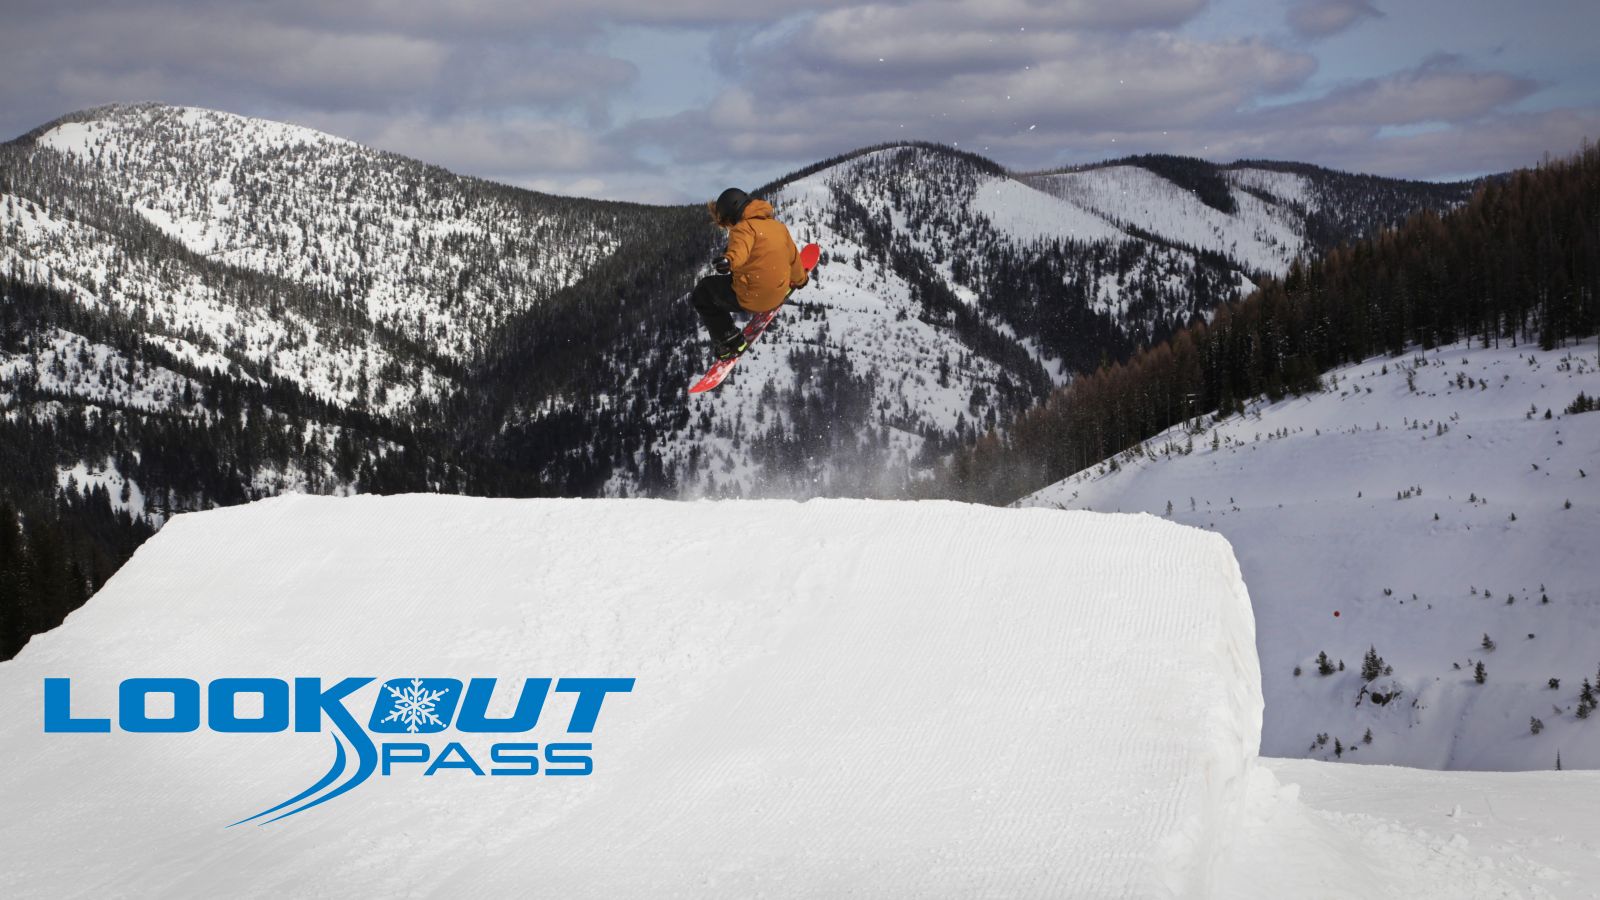 Craig jumping at Lookout Pass in the Terrain Parks